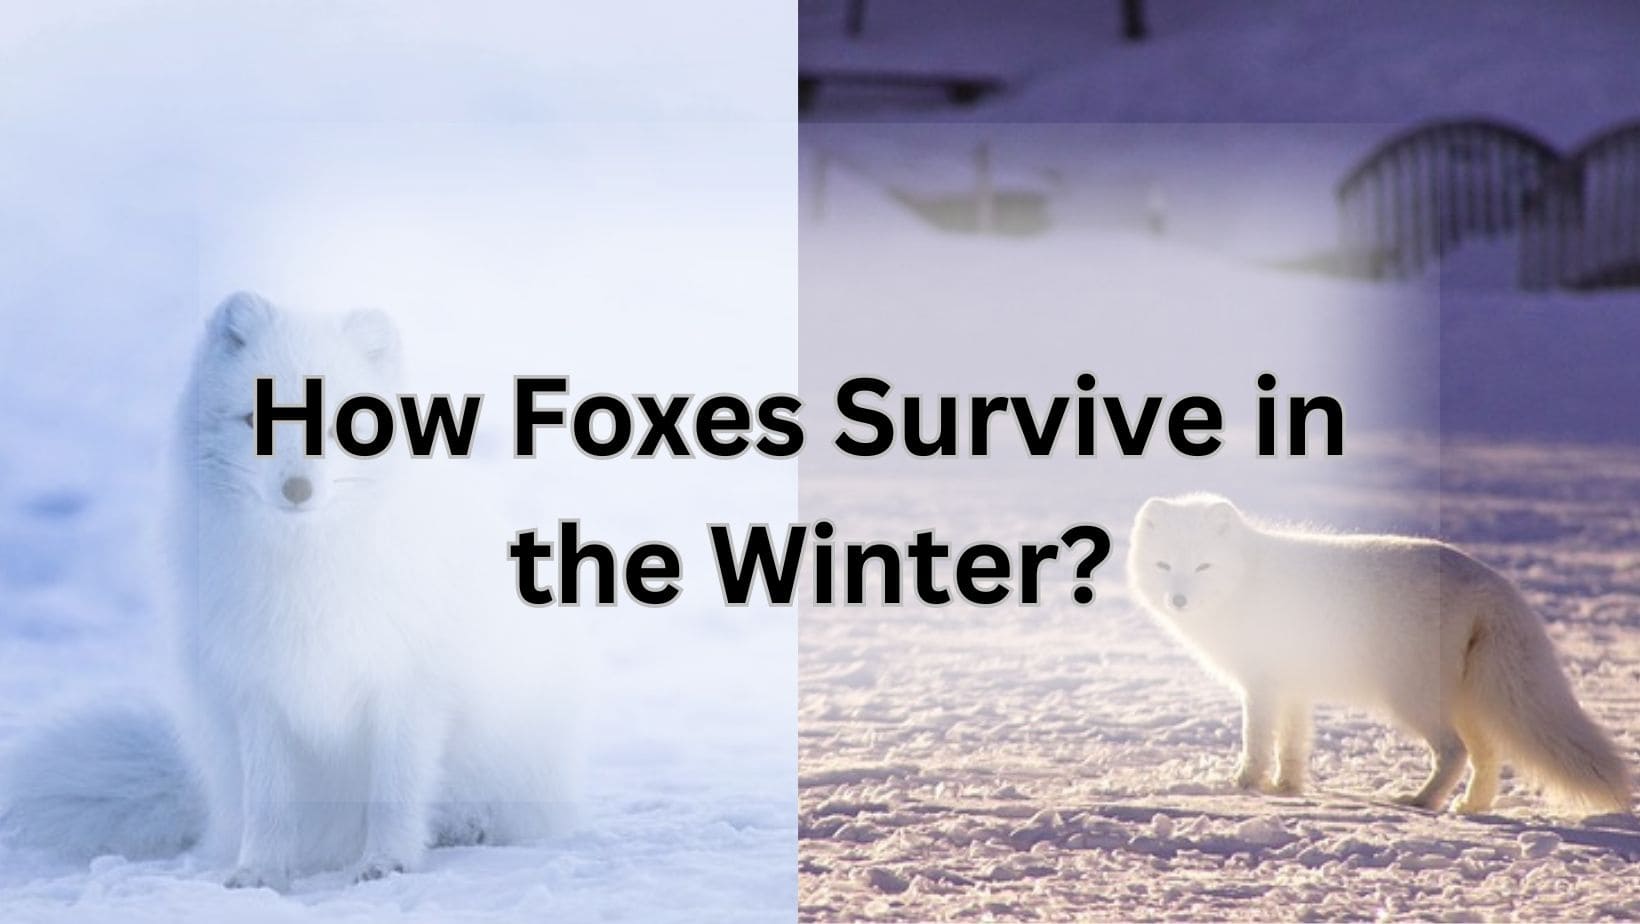 How Foxes Survive in the Winter?